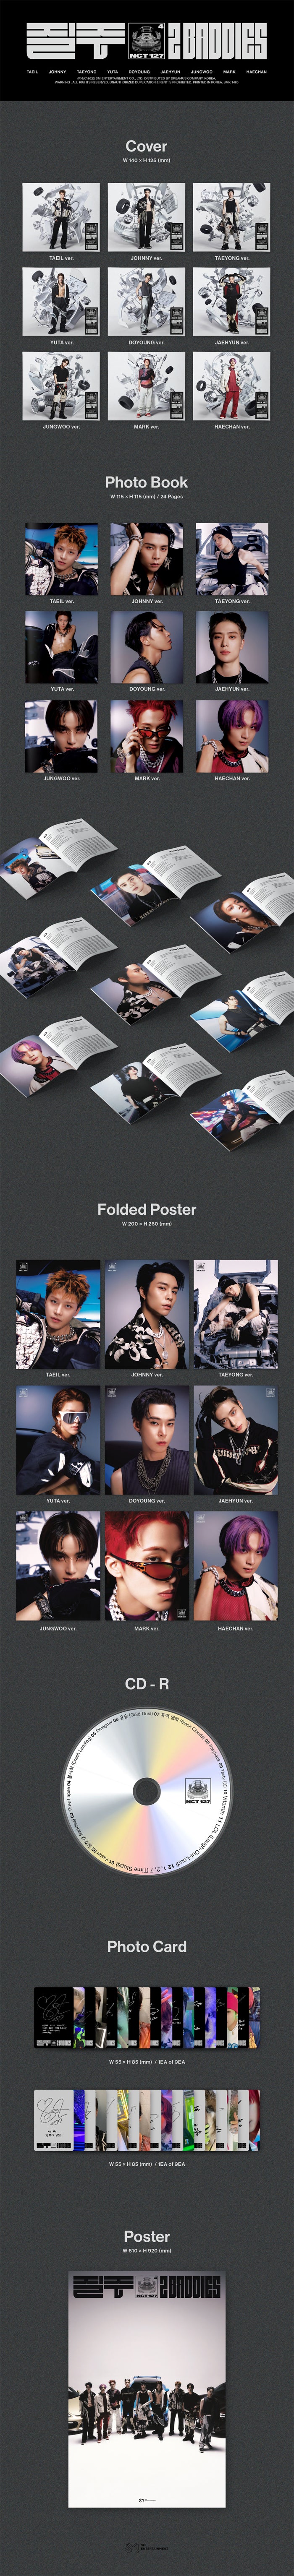 1 CD
1 Photo Book (24 pages)
1 Folded Poster
1 Photo Card (random out of 9 types)
1 Special Photo Card (random out of 9 ty...